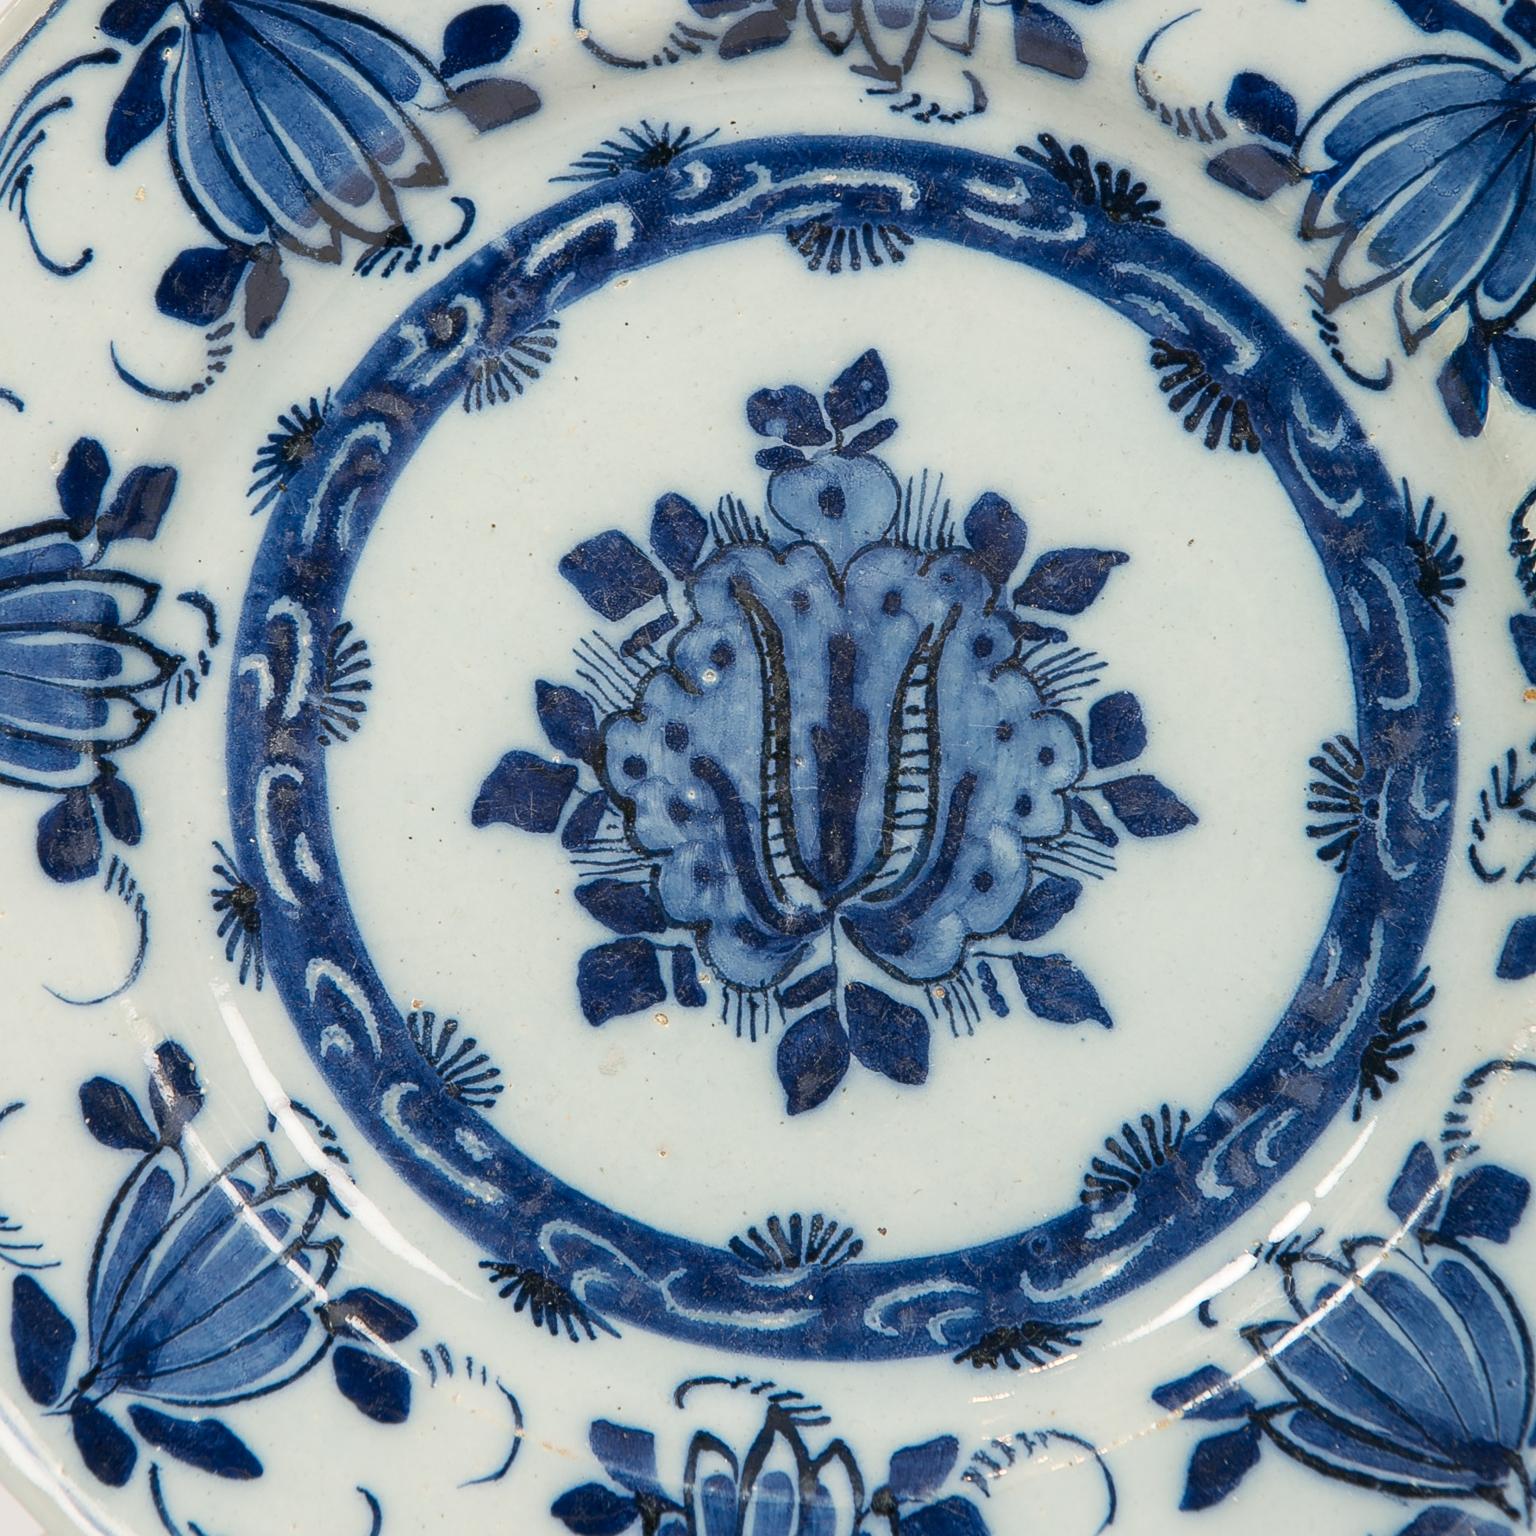 Rococo Eleven Hand-Painted Blue and White Delft Dishes 18th Century